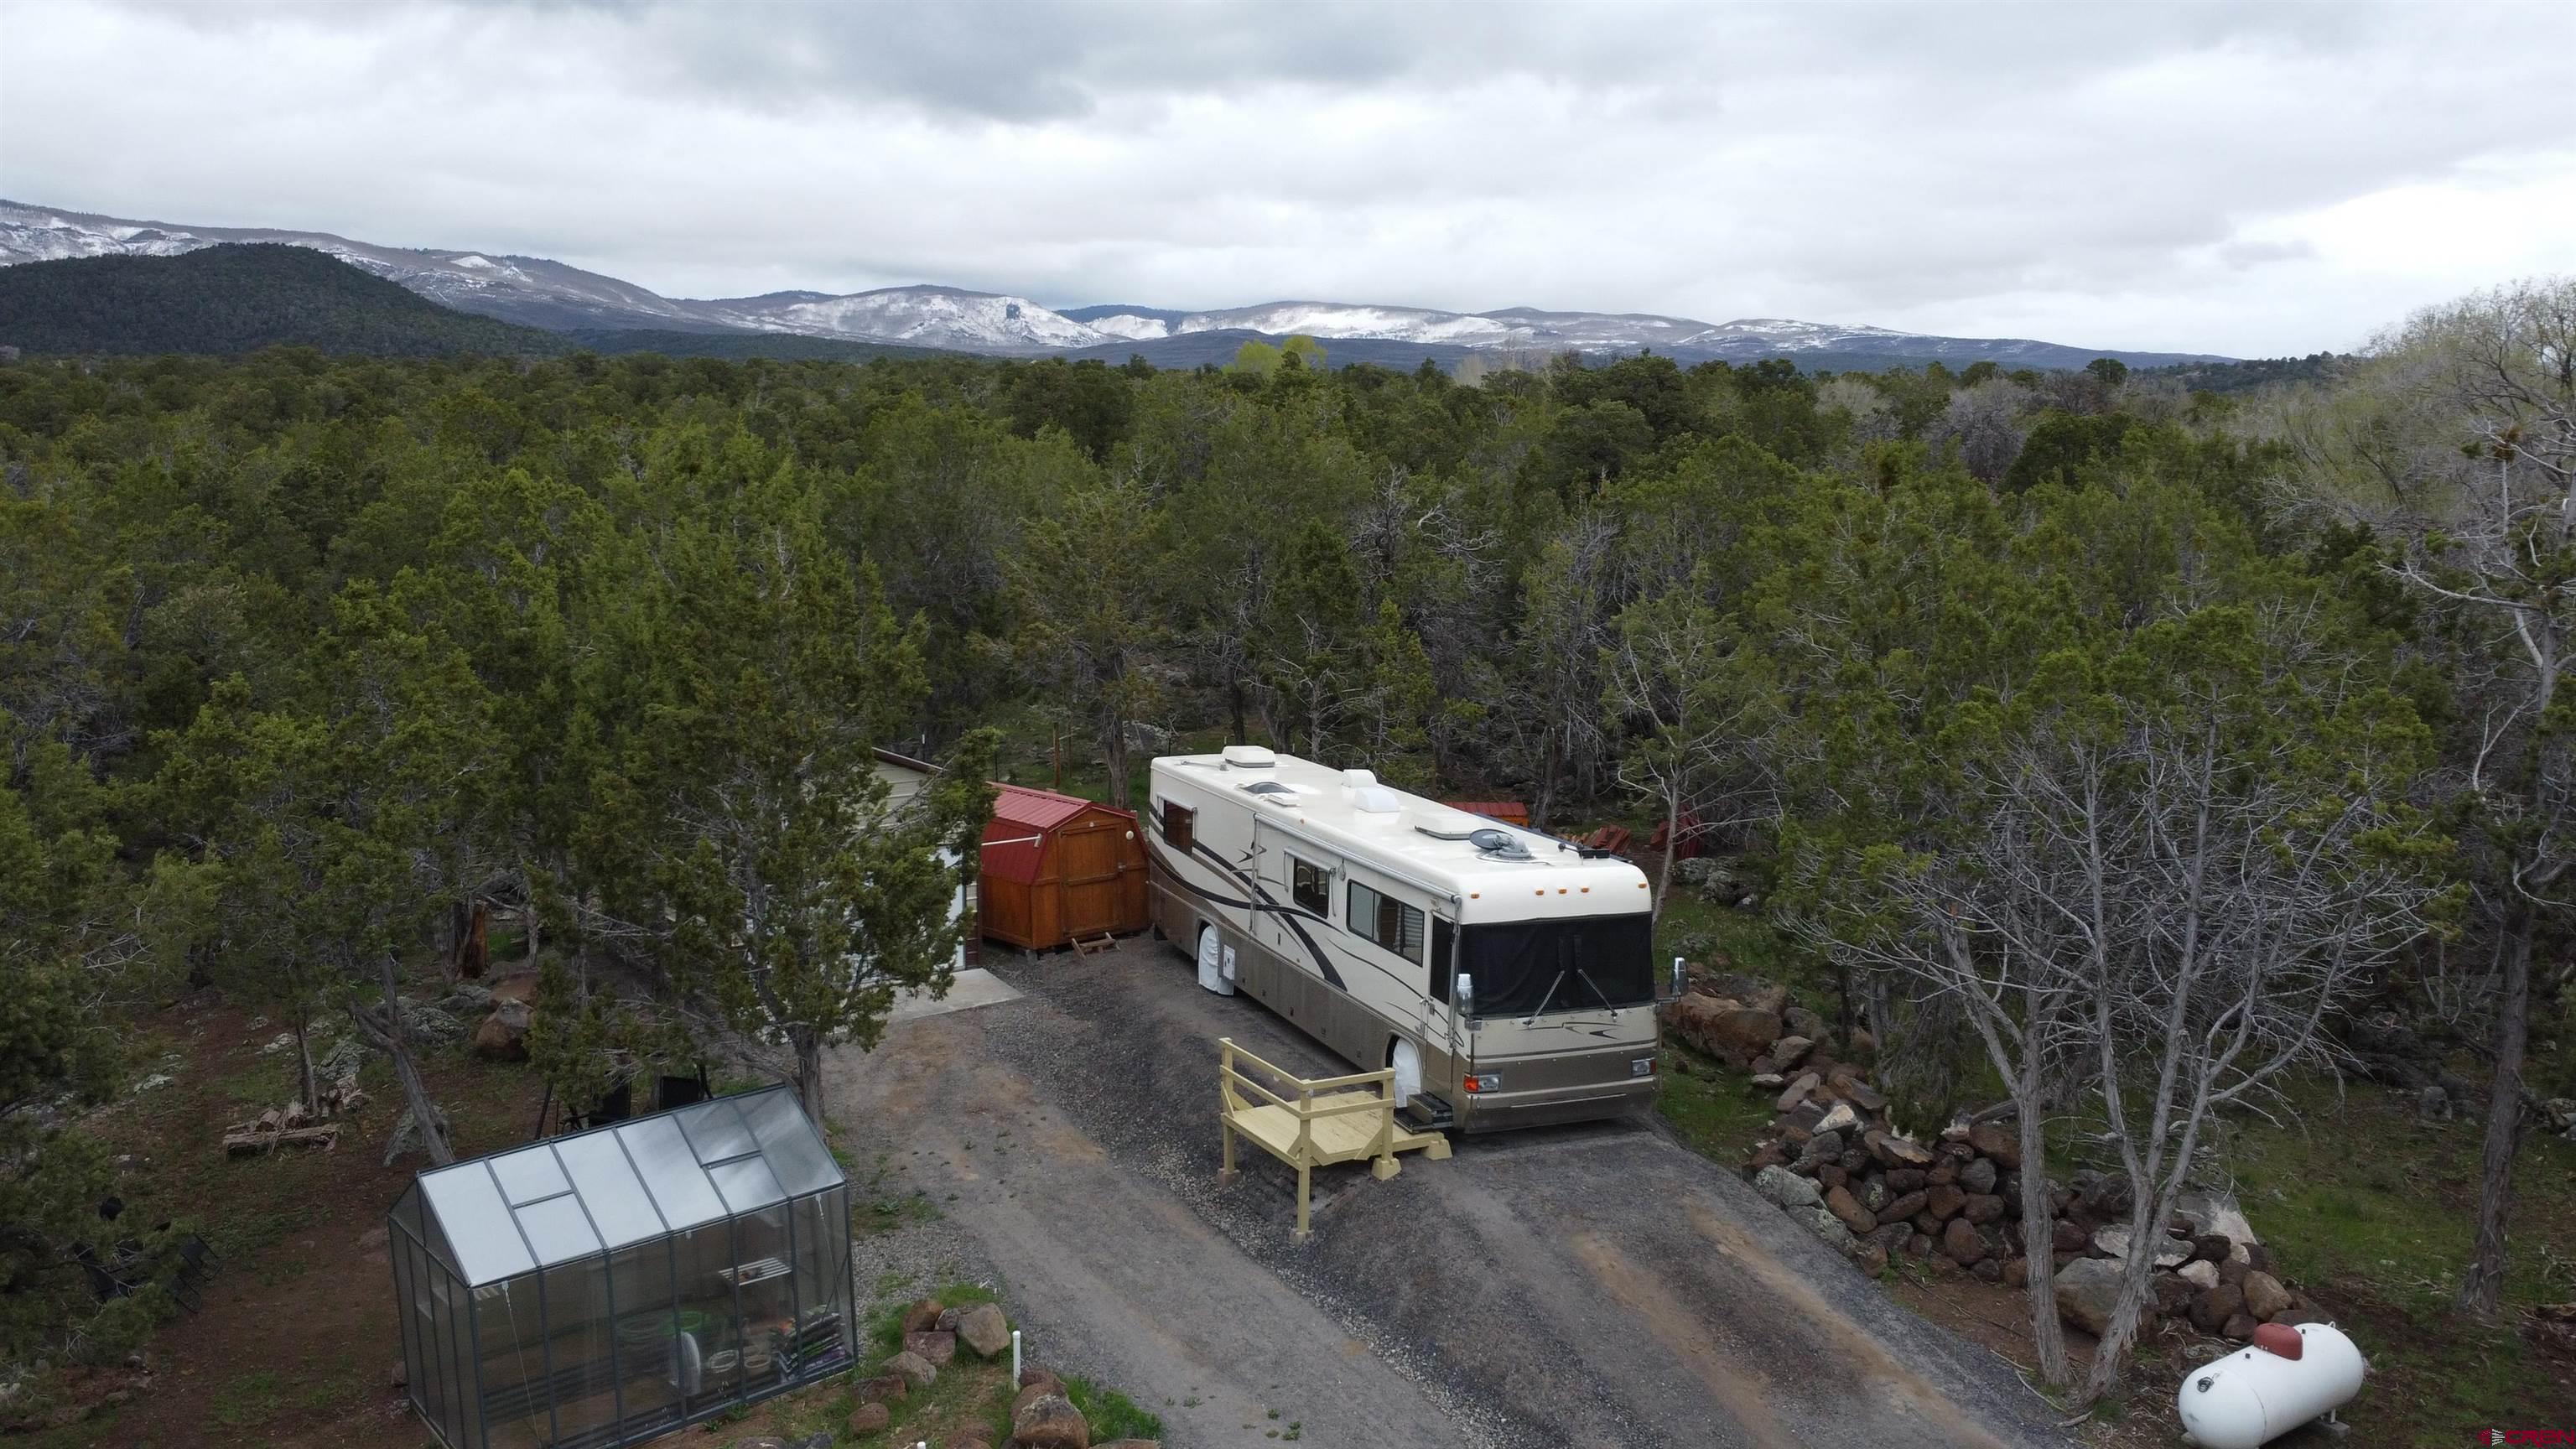 Own your own Grand Mesa Mountain retreat!  This 4.9 acre wooded property has it all.  A paid and installed Colby water tap, A engineered and installed septic system, a 200 amp electric service, and both views and privacy.  Behind the gate this property is set up for RV living currently.  It has a 20x14 insulated shop, a 20x8 shed that is set up with a laundry room, and if that is not enough it has a Greenhouse! Enjoy the paths that are established throughout the property or the garden area.  Peaceful living at its best.  The property is also being offered with the 40’ motorhome for a total price of $260,000.00.  If purchased with the motorhome the property also comes with the back-up generator.  You could use this while you build your dream home or just use it like it is.  The Town of Cedaredge has so much to offer with the 18 hole golf course, The Grand Mesa Art Center, Town Park and then you also have access to the Grand Mesa National Forrest.  Where you can enjoy hunting, fishing in one of the hundreds of lakes, hiking, cross country skiing, mountain biking, ATVing, or many of the other activities.  Welcome to your own little slice of Heaven!